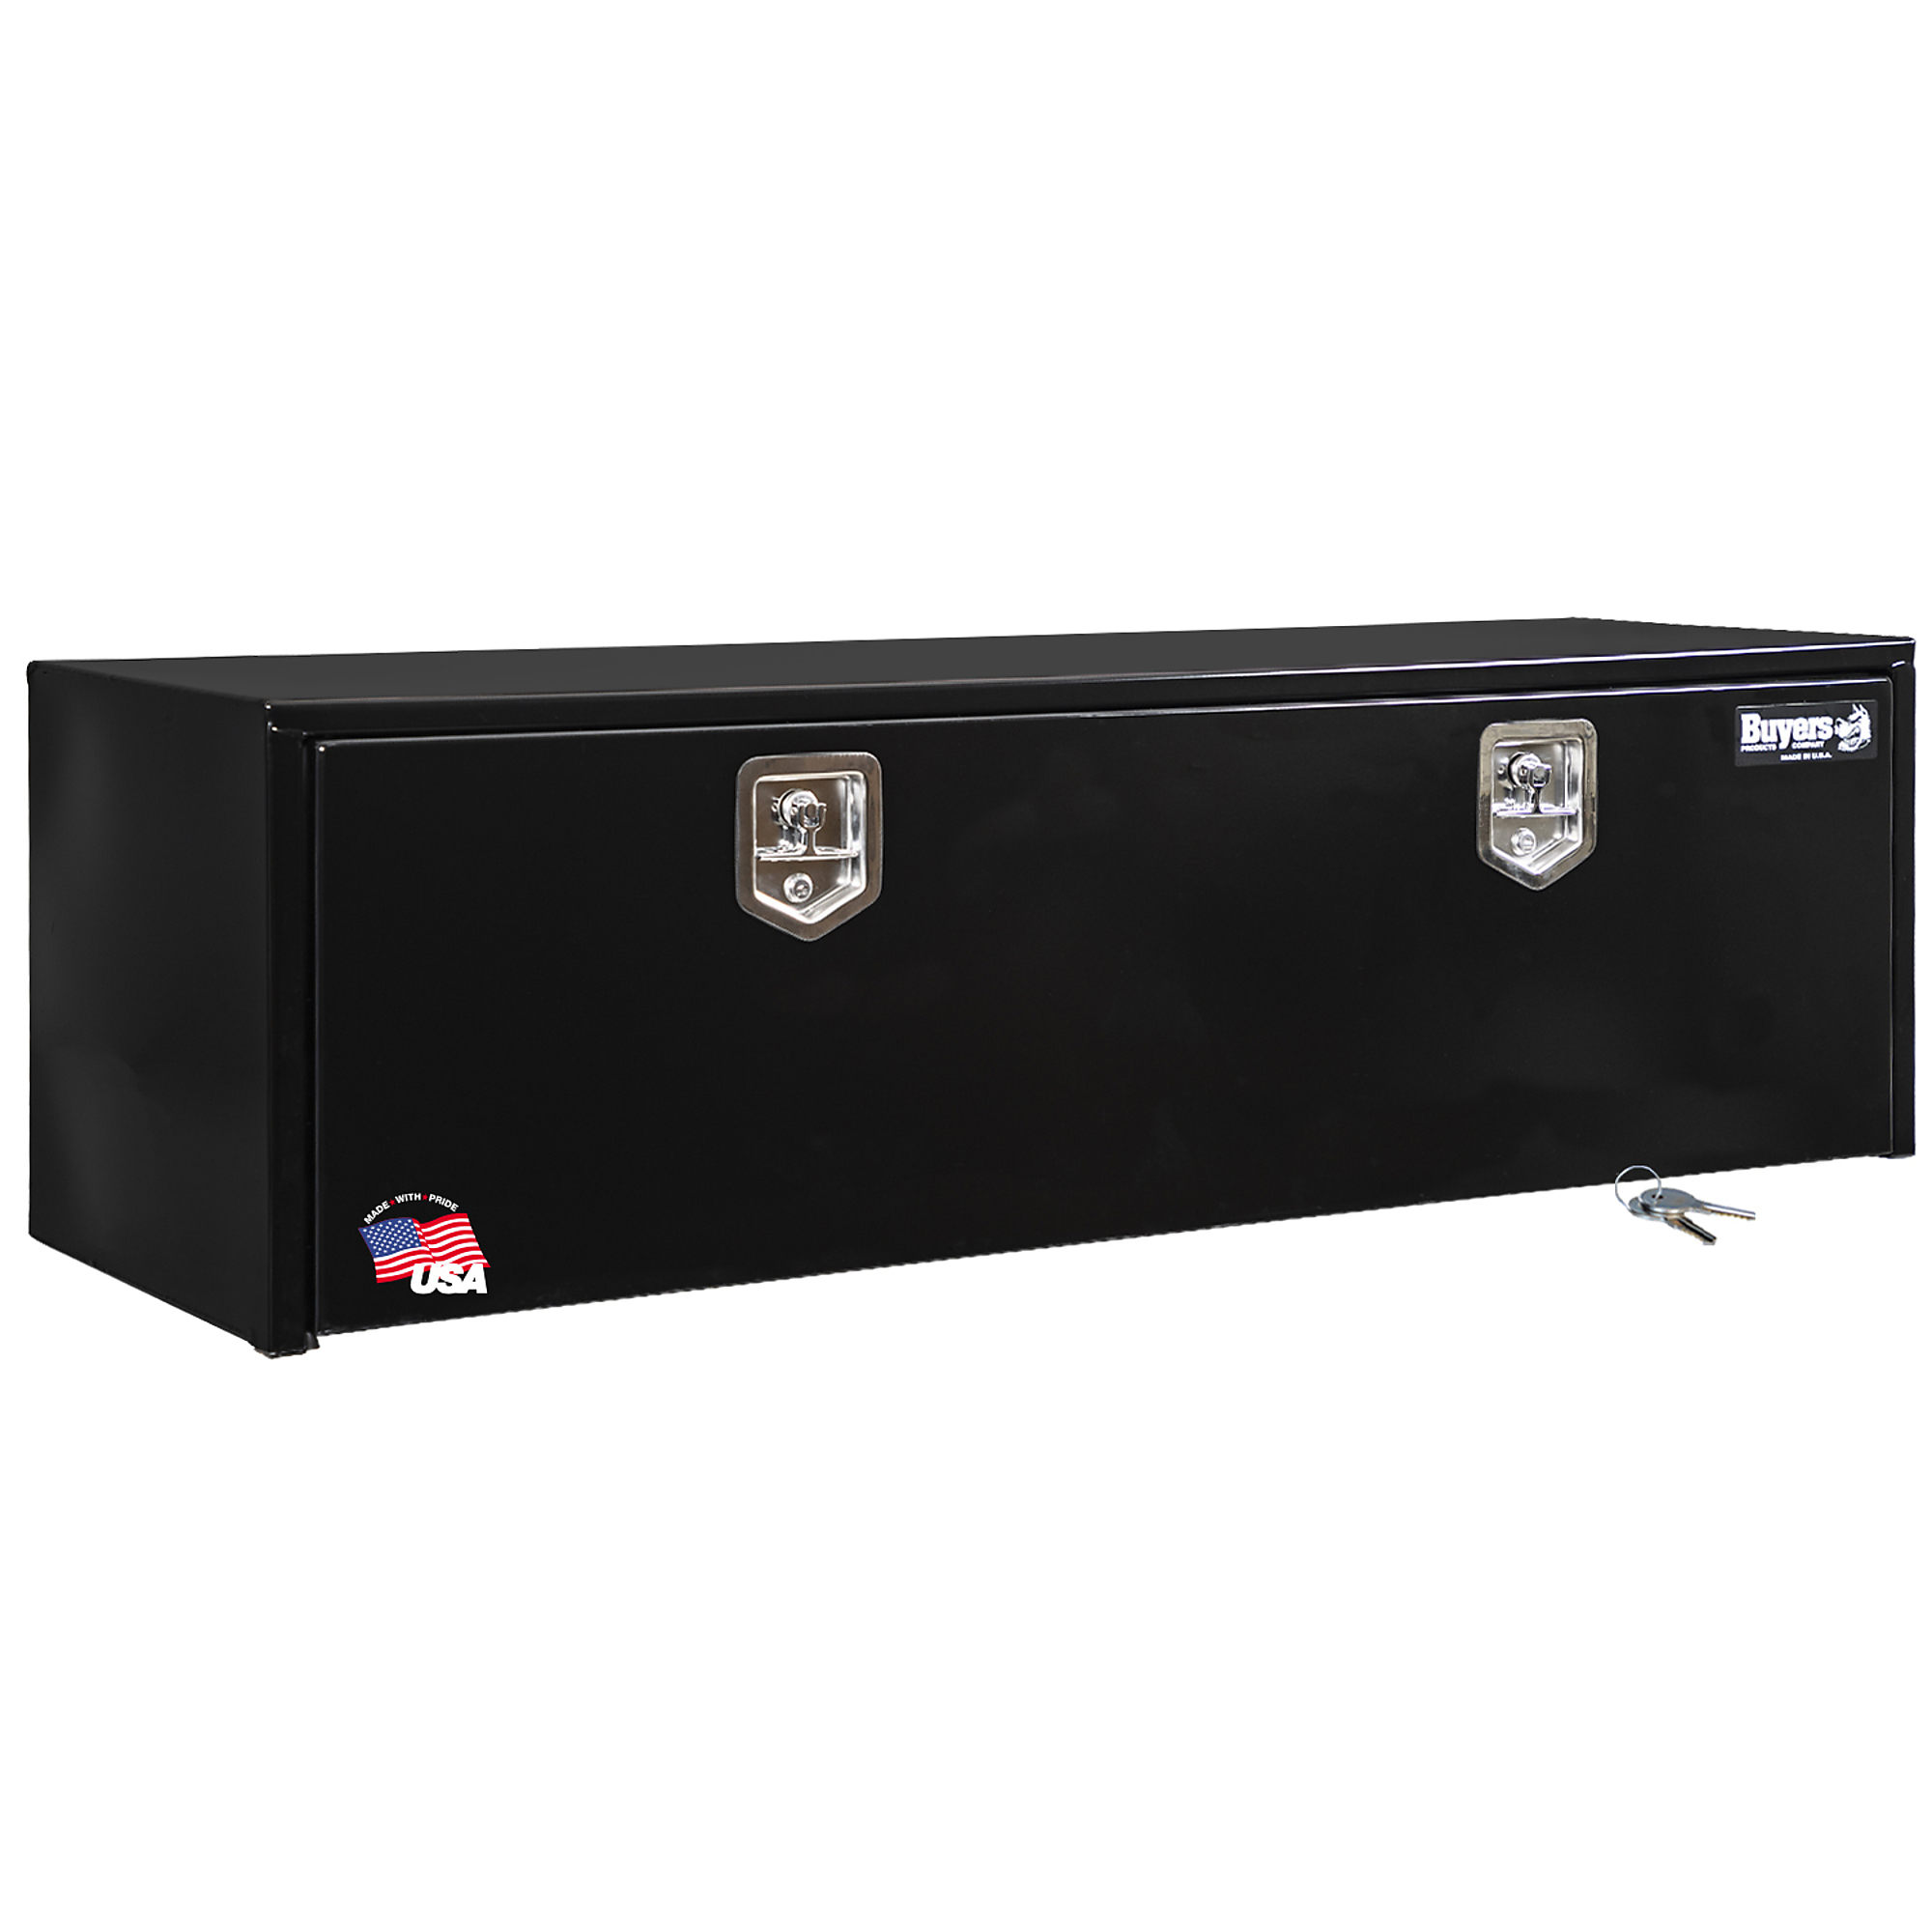 Buyers Products, Underbody Truck Box, Width 60 in, Material Carbon Steel, Color Finish Glossy Black, Model 1702315